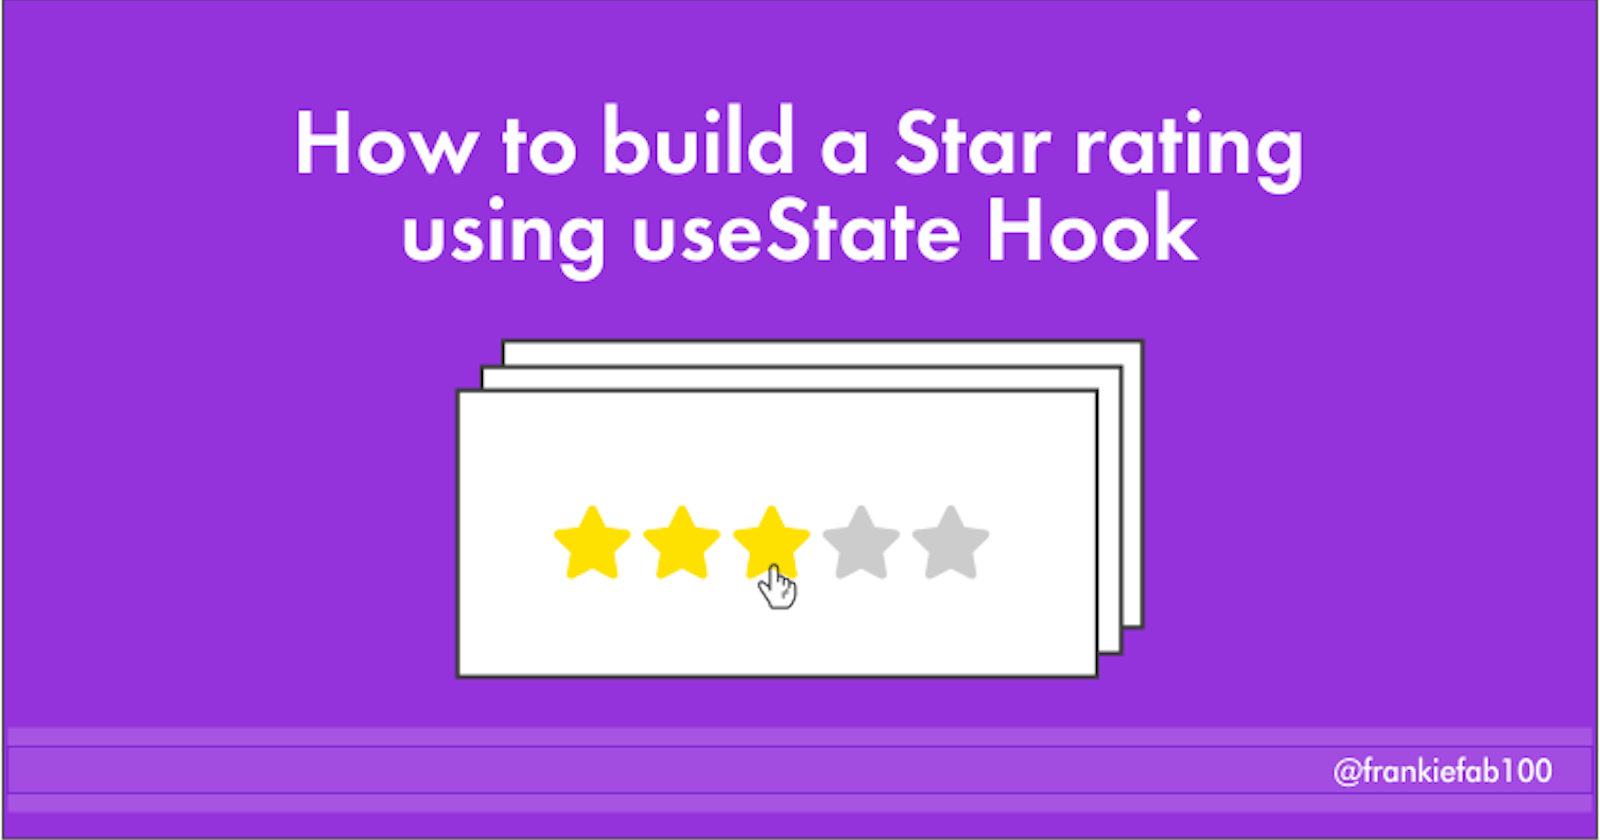 How To Build a Star Rating Using useState Hook